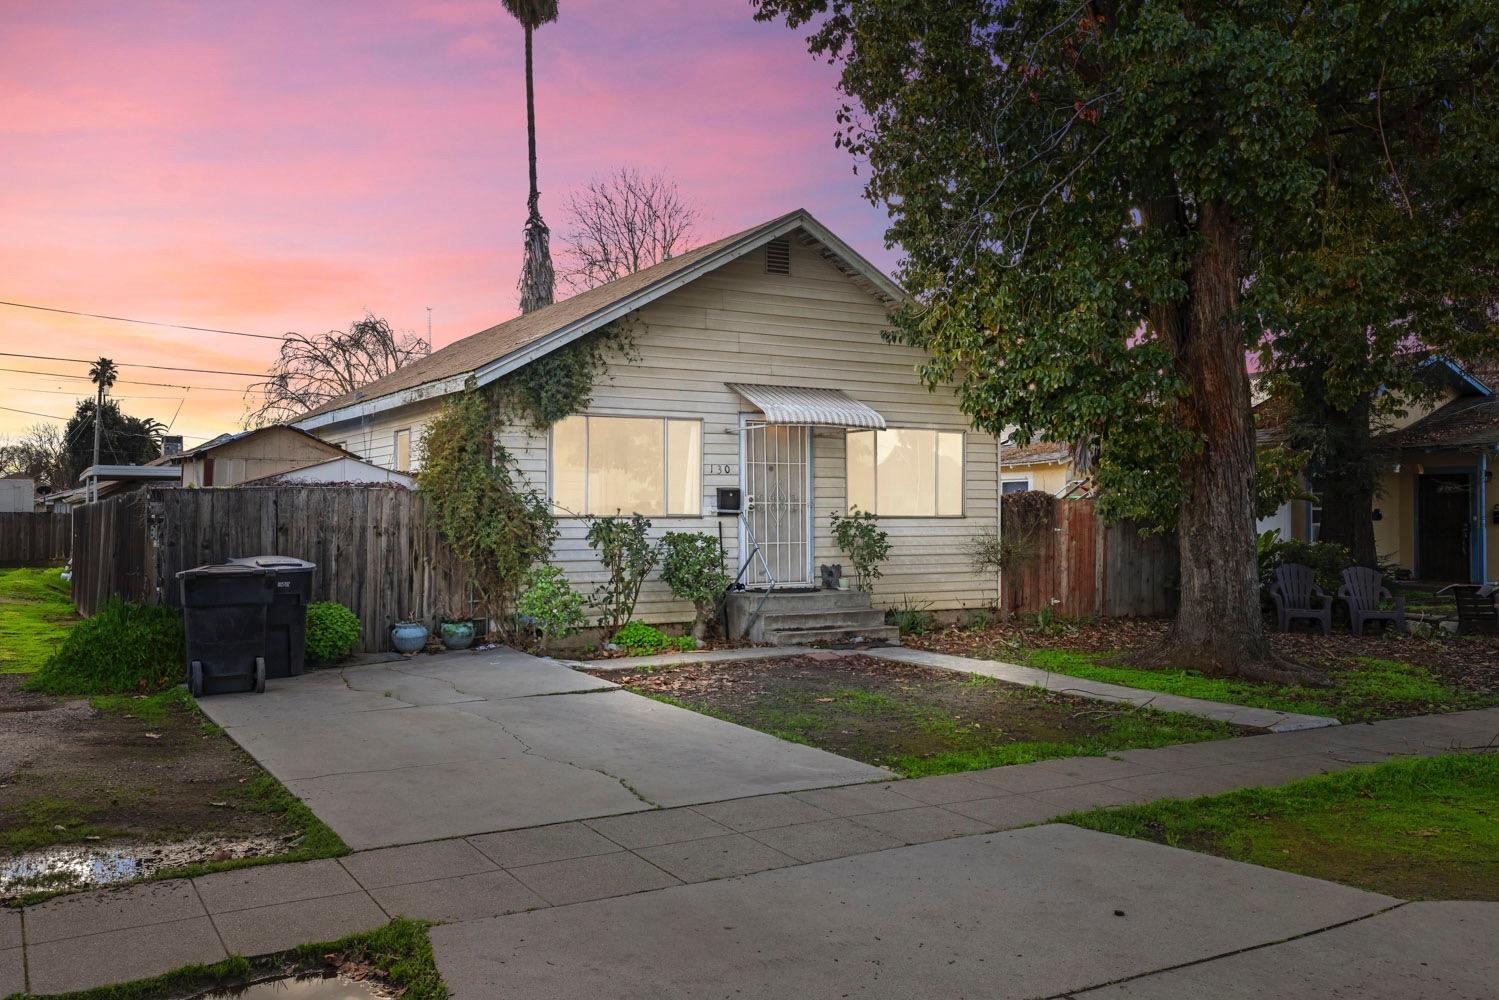 Photo of 130 2nd St in Ripon, CA